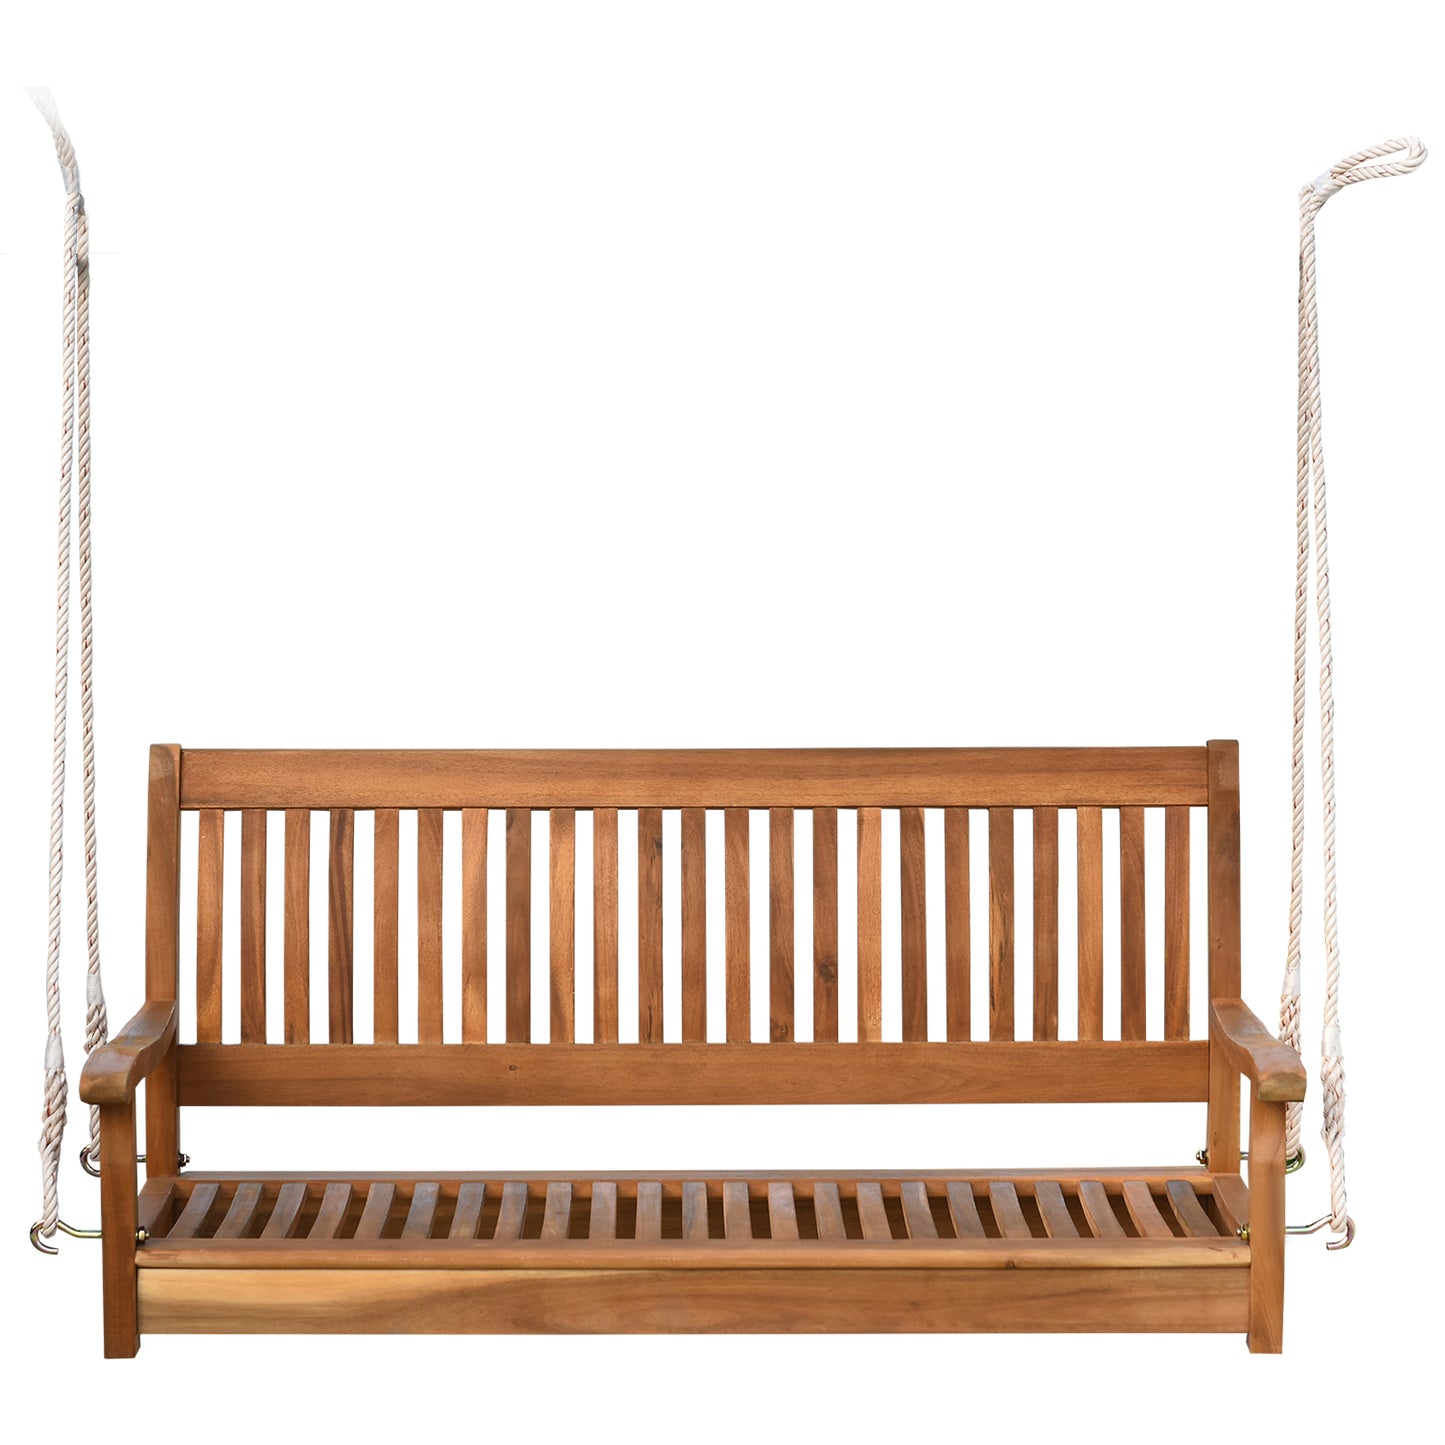 50'' Wooden Swing Bench Garden w/ Supportive Ropes for 2 Person Without Frame at Gallery Canada